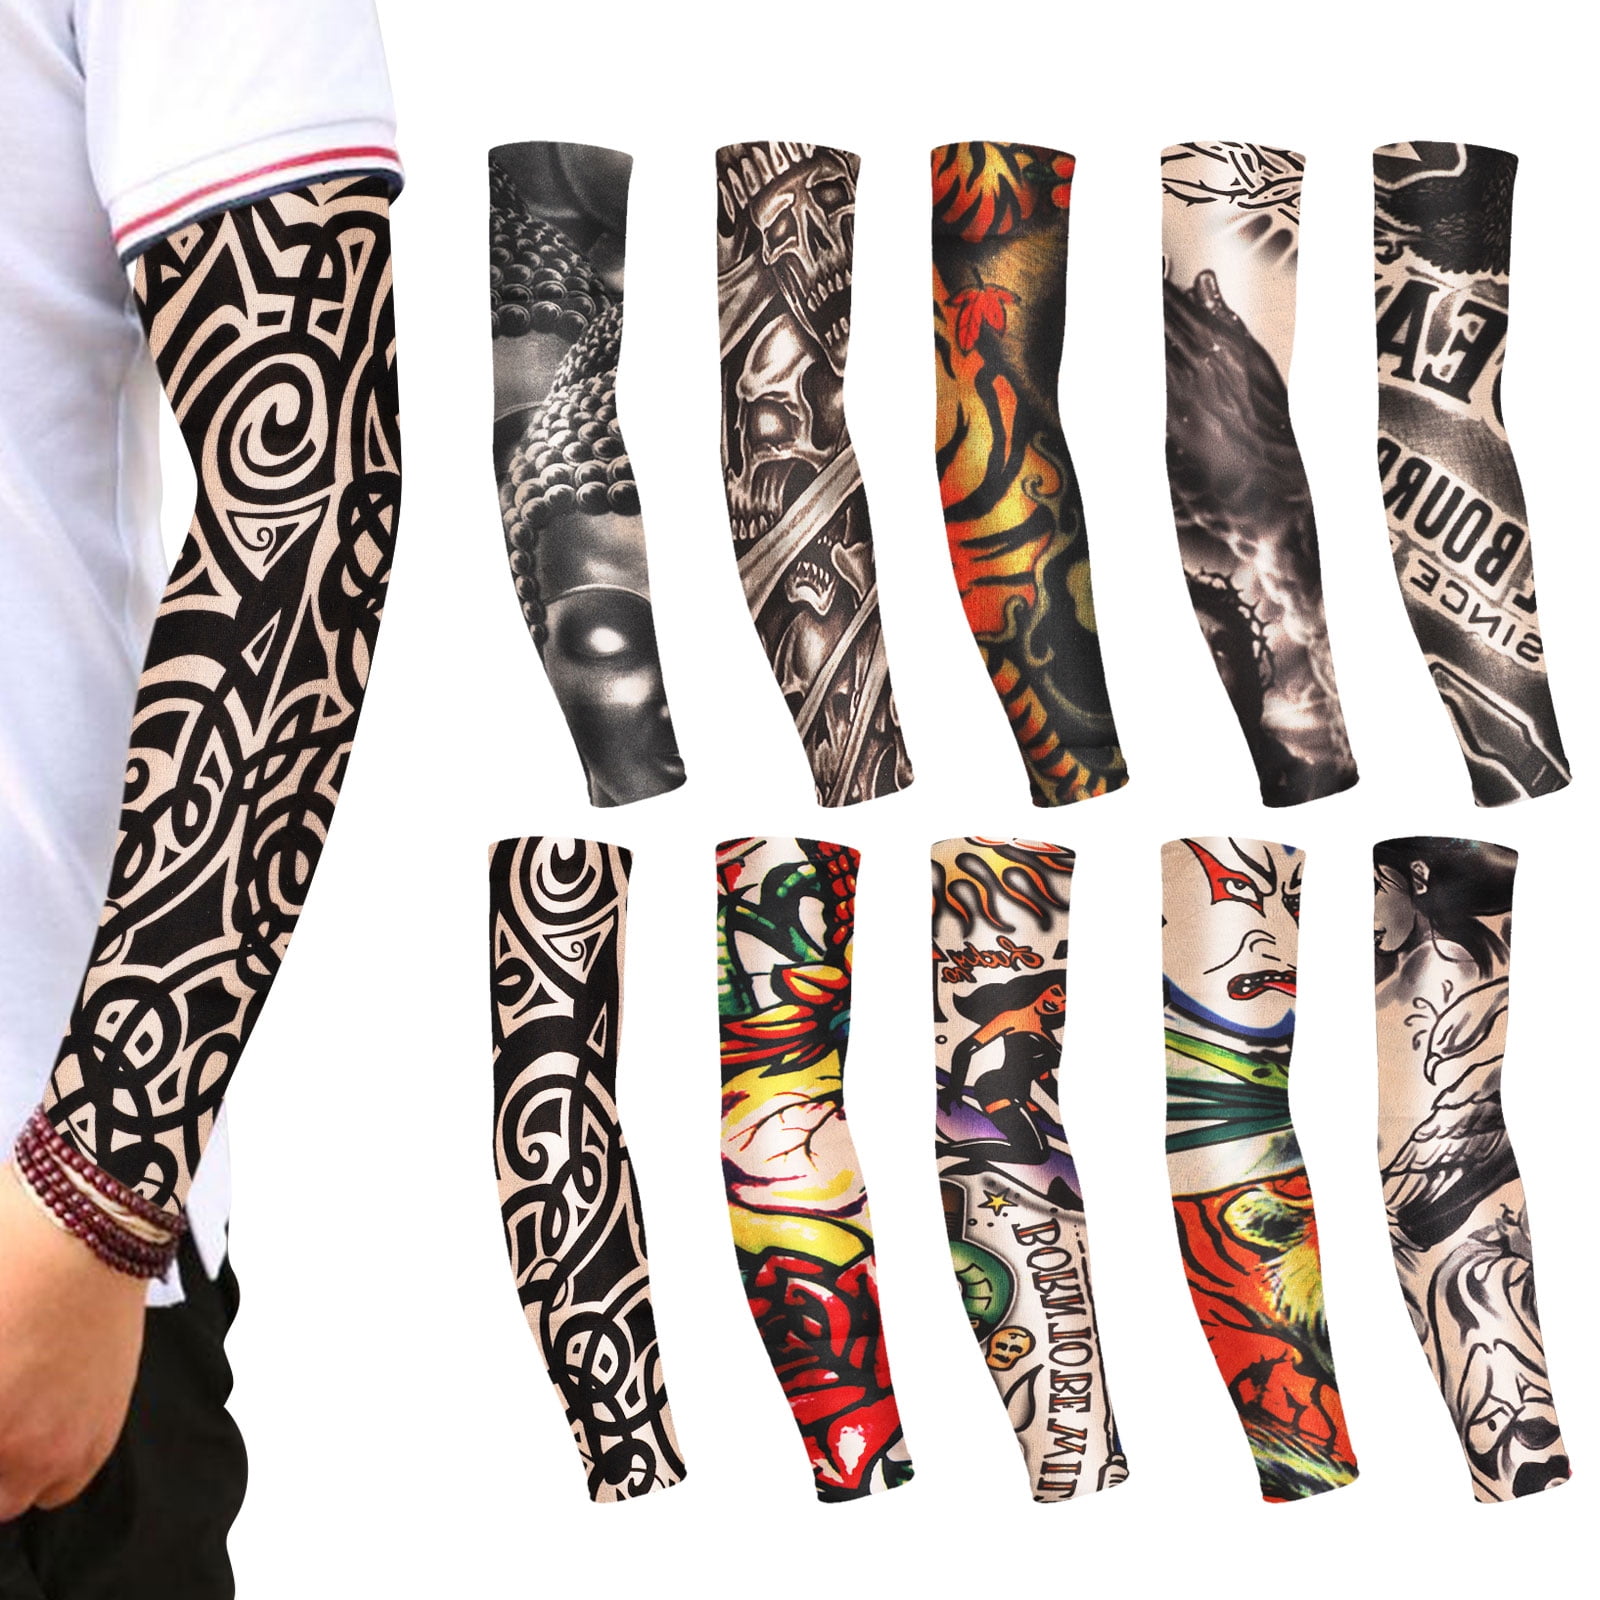 SUNTRADE Arm Sleeves for Women Men，Long Sleeve for Outdoor Activities Skin Protection，3 Pairs